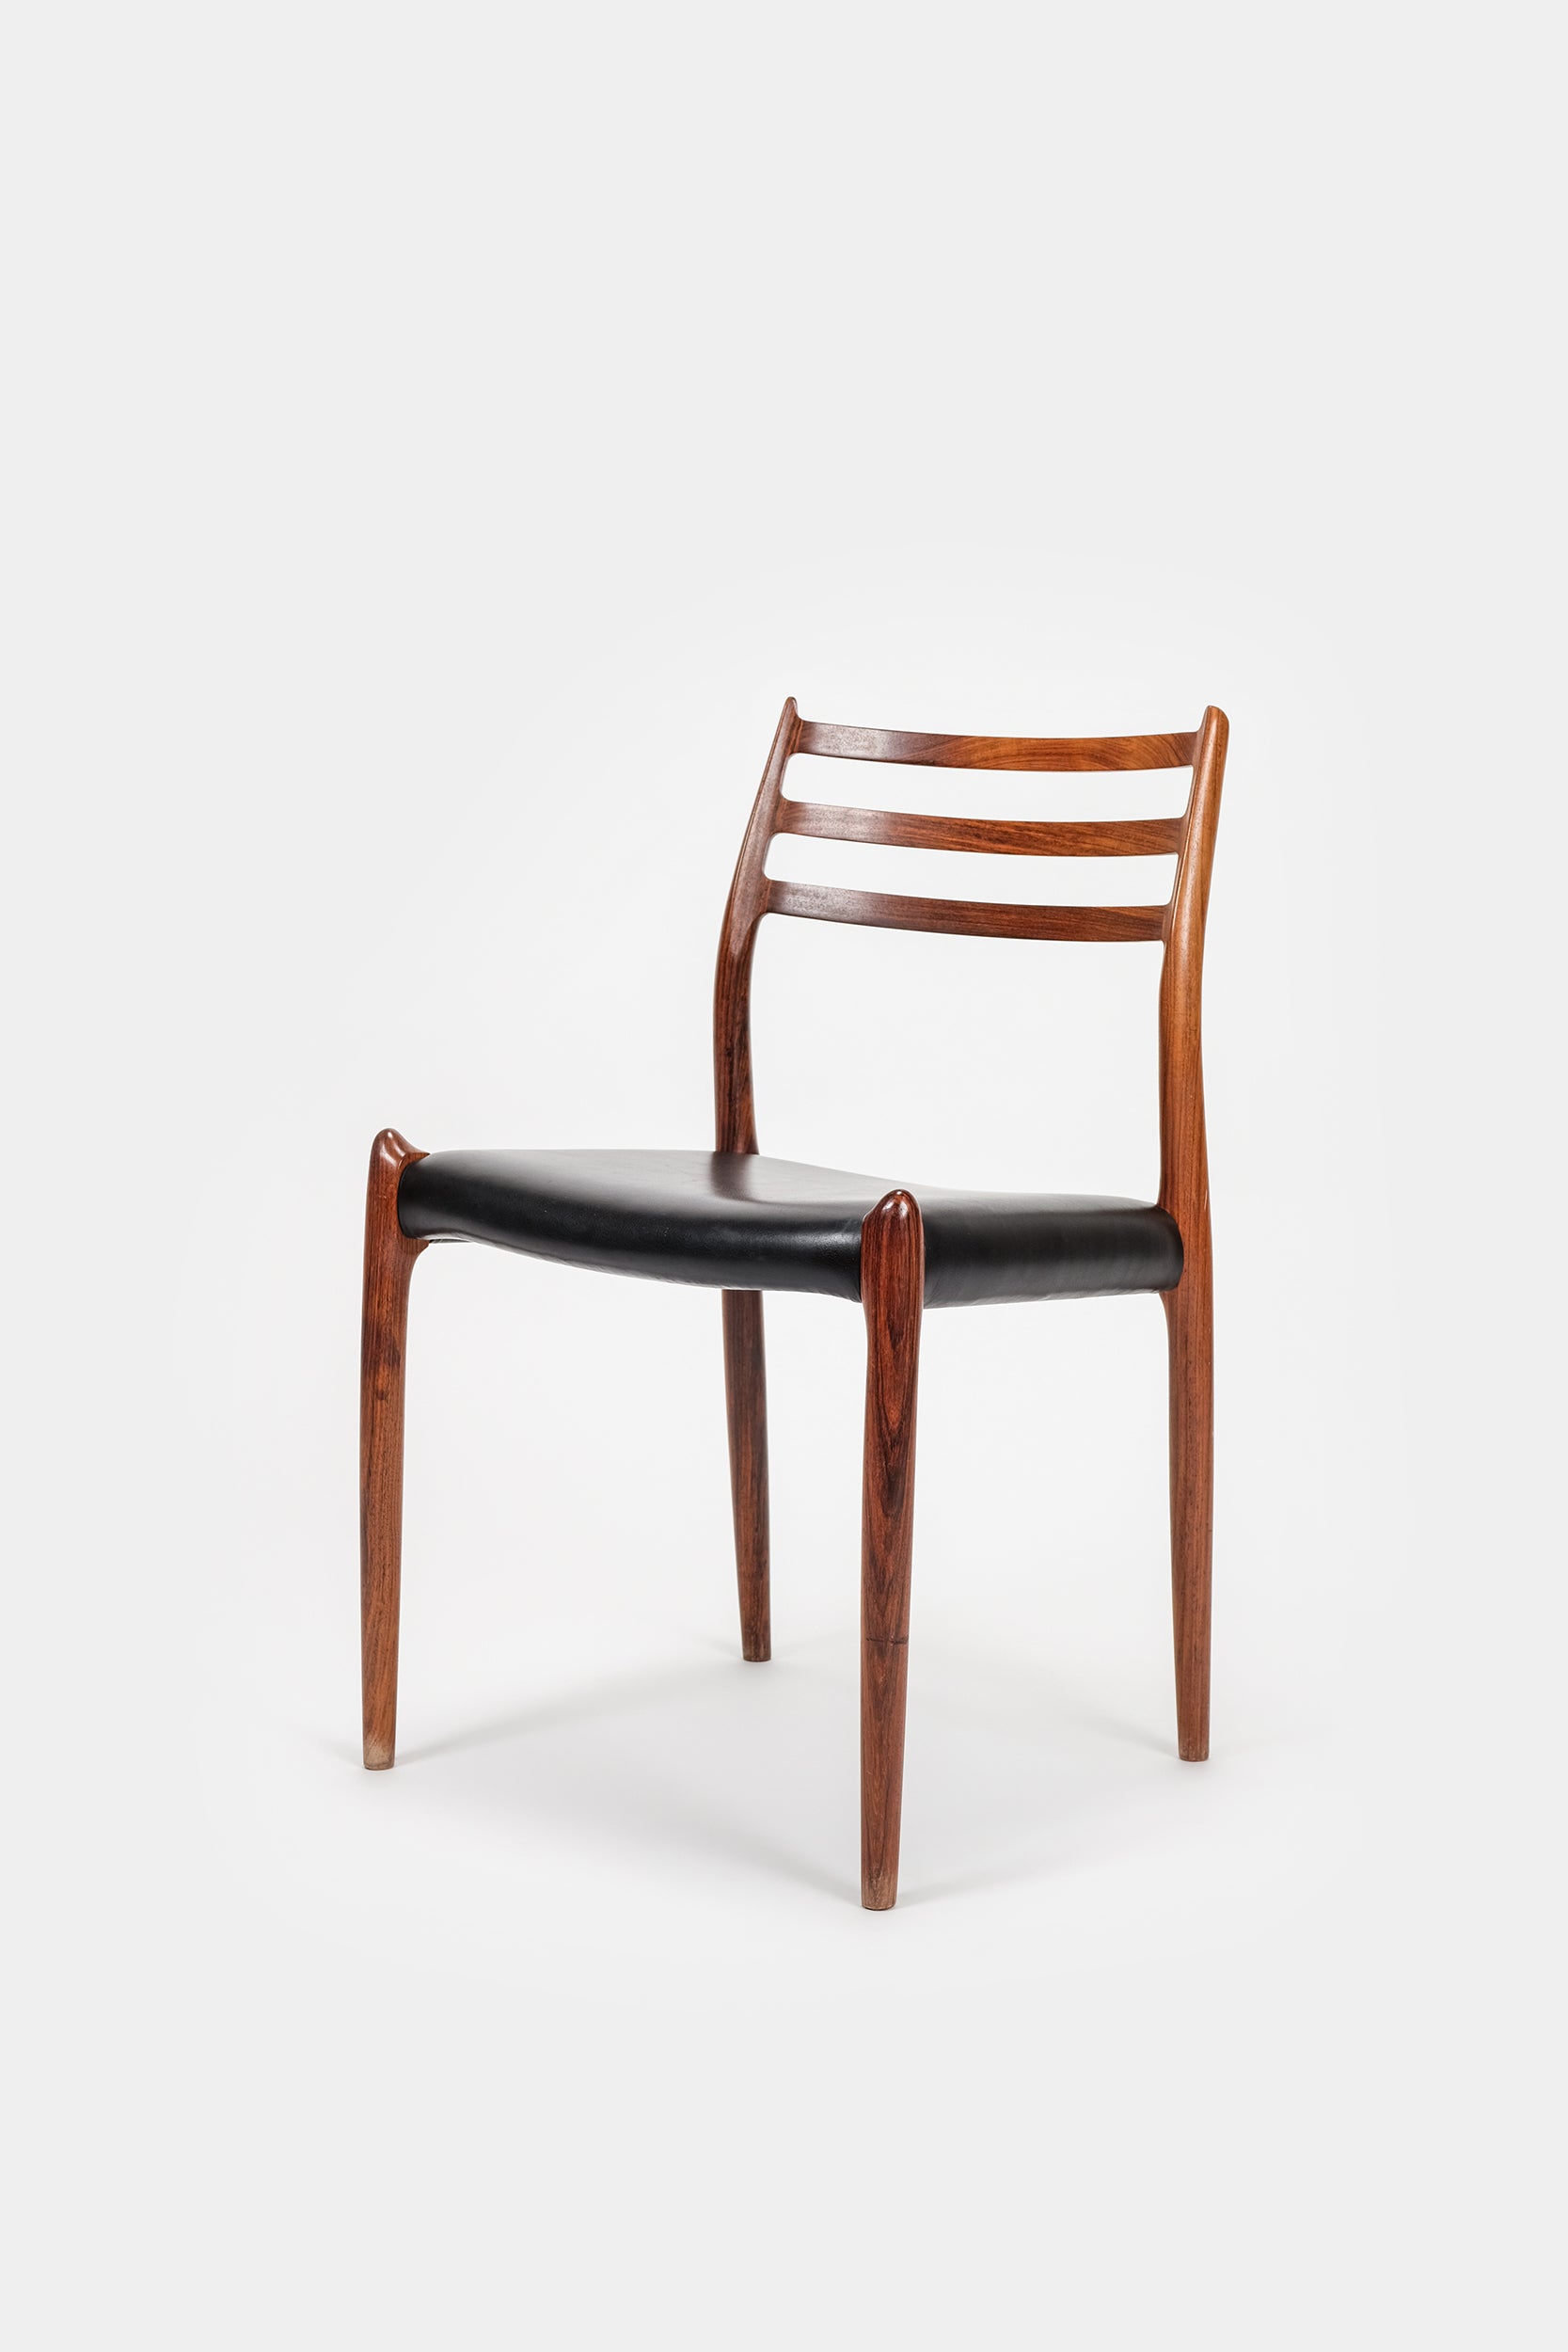 4 Rosewood Niels Otto Møller chairs, by J.L. Mollers, 50s